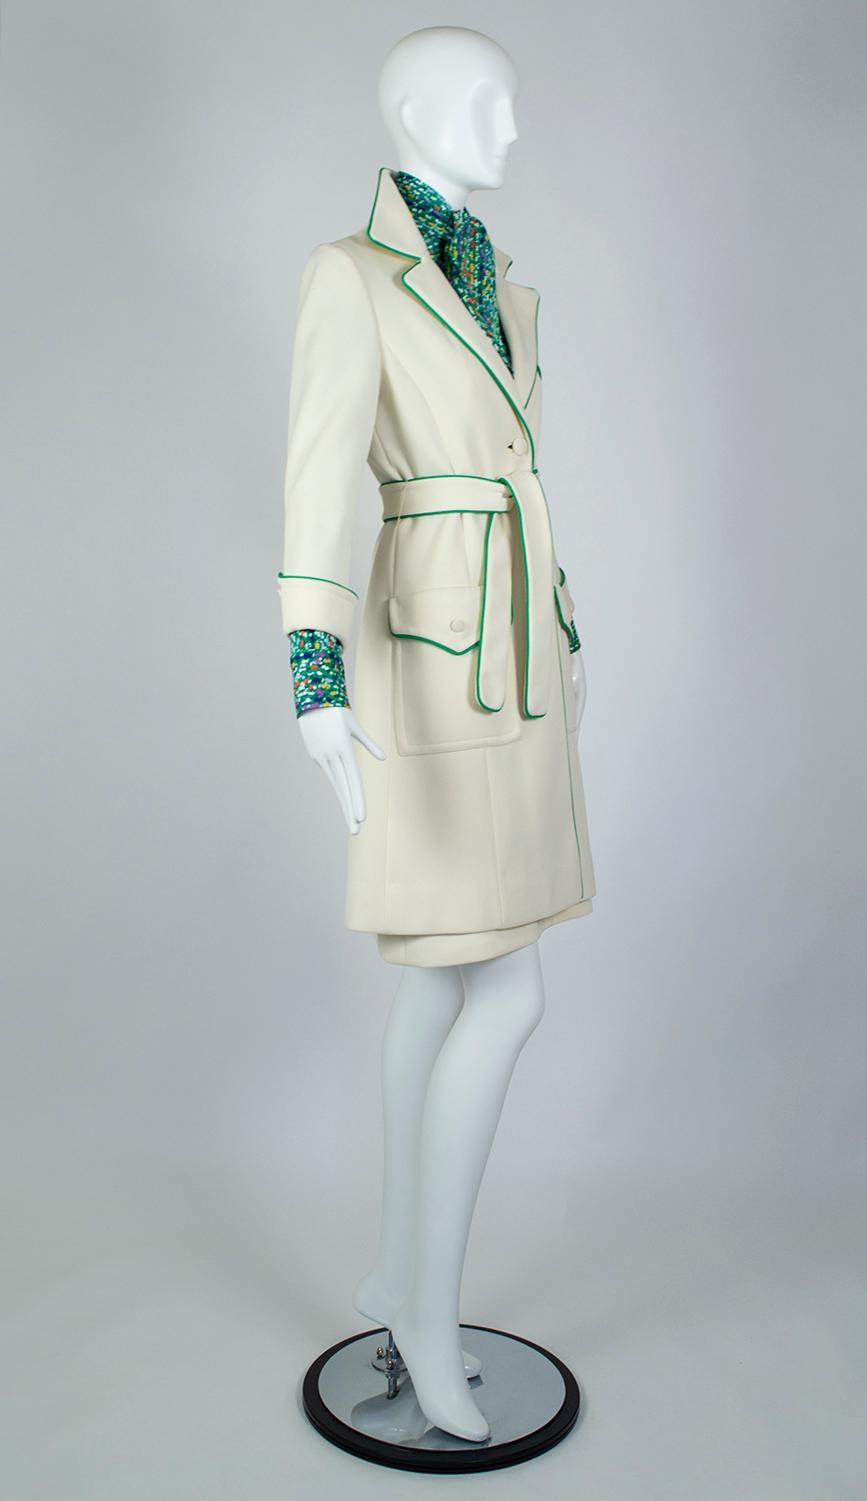 Reminiscent of the Mod Squad air hostess uniforms of Braniff and TWA, this impeccable matching coat and dress ensemble are a walking ray of sunshine. A 3-piece outfit including a shirt dress with attached neck scarf, matching belt and piped trench